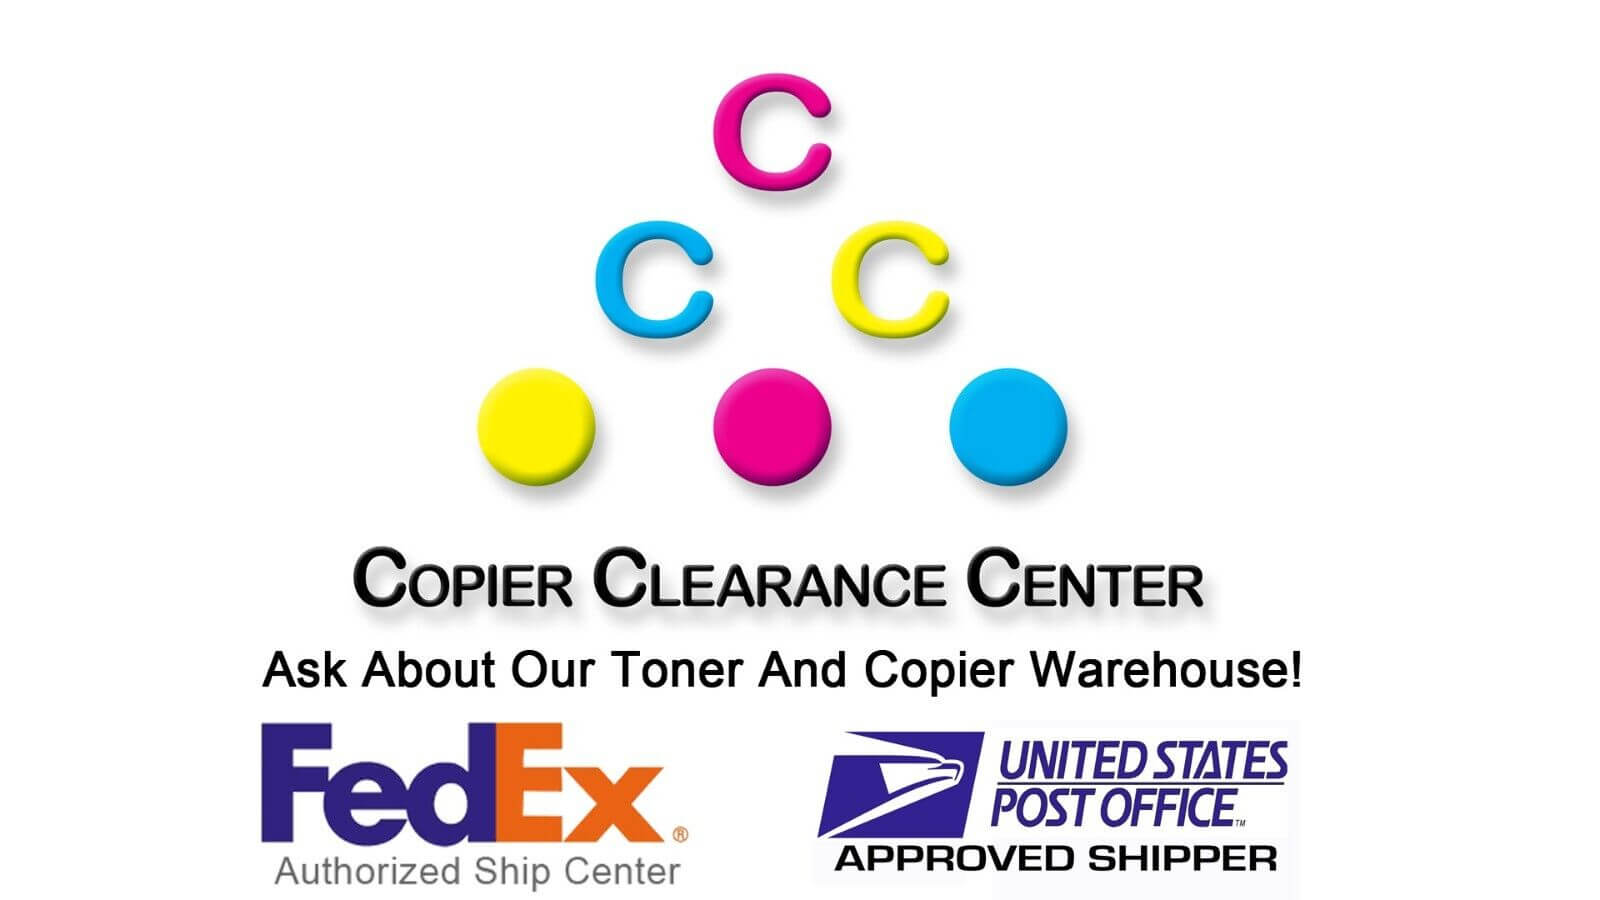 Open Box Unsealed Ricoh MP C7500 C7570 Magenta EDP: 841290 Same Day Shipping!!! - copier-clearance-center